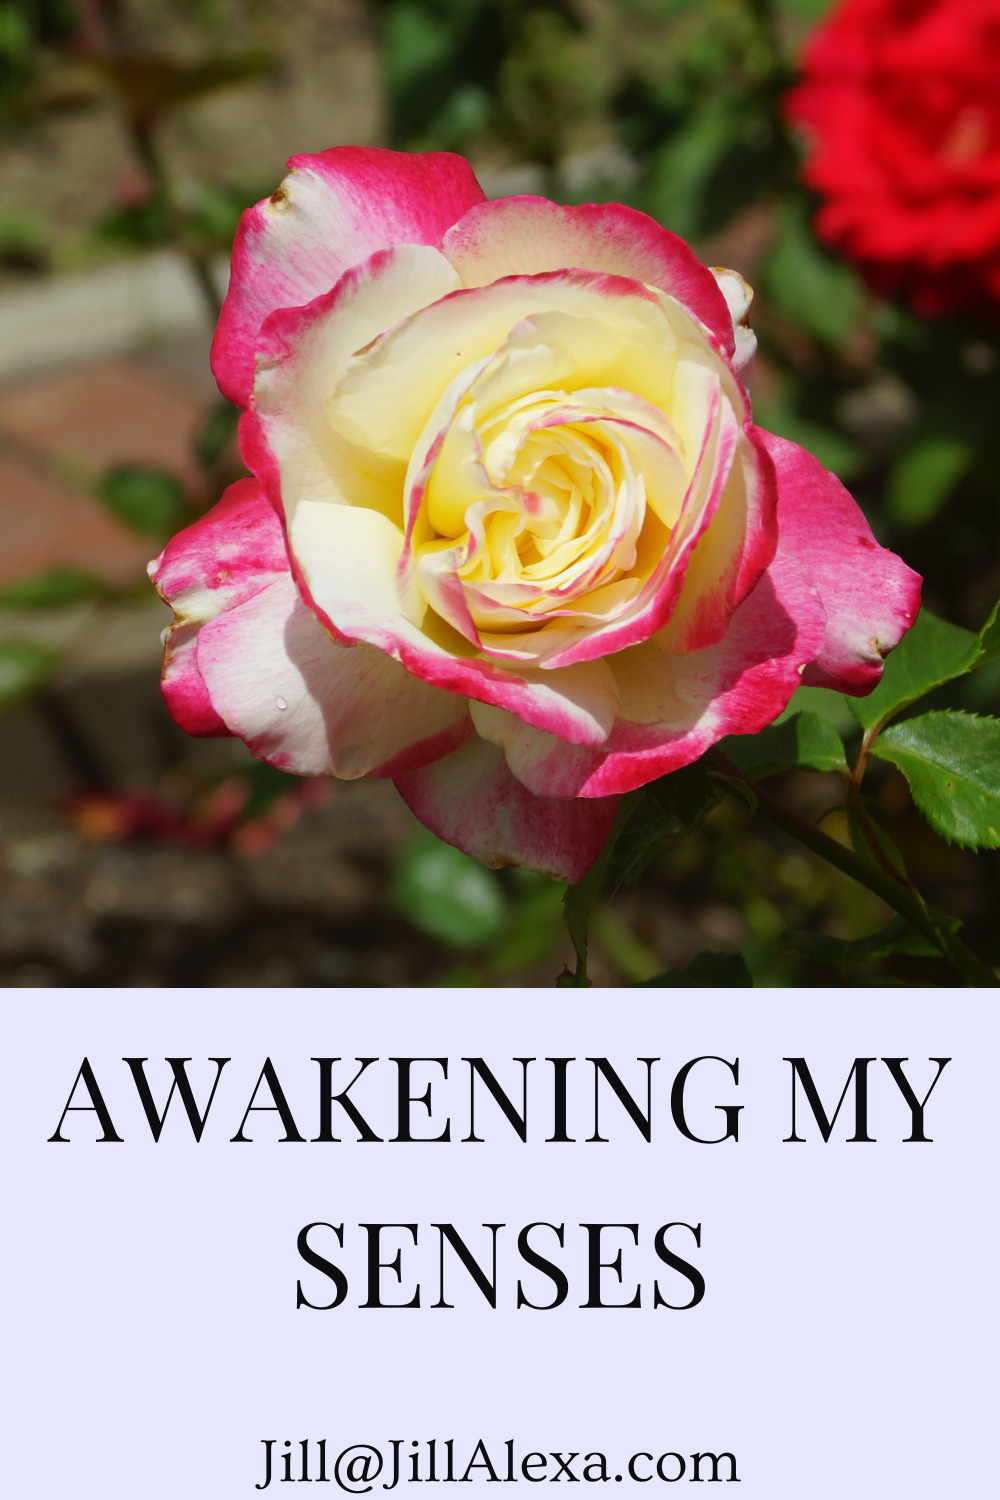  AWAKENING MY SENSES - While we still have our senses intact, it would be a waste and a shame not to use every single one of them to the fullest.